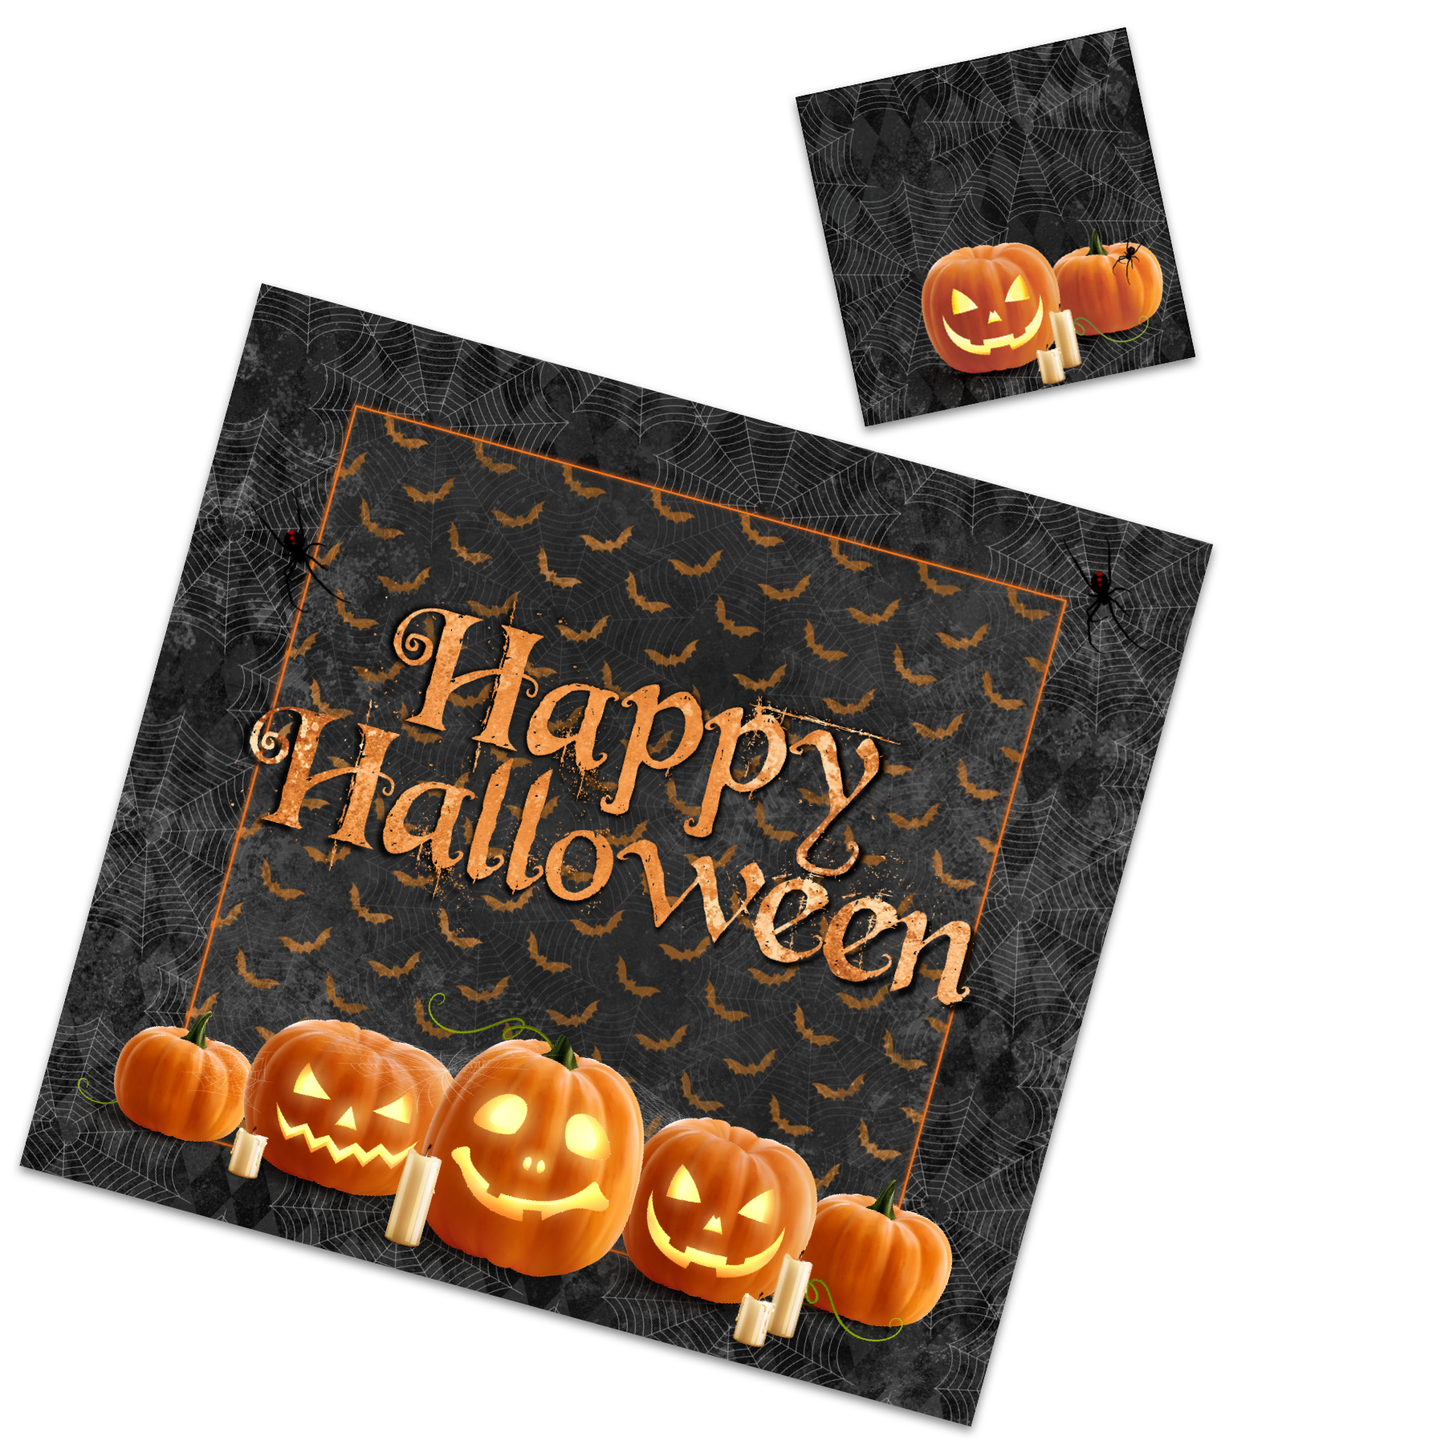 Fun, cute, scary Halloween Jack o'lantern paper placemats  Disposable square paper place-mats with matching coasters.  Printed on heavy glossy card stock.   Set of 12  Size 13.5" x 12.5"